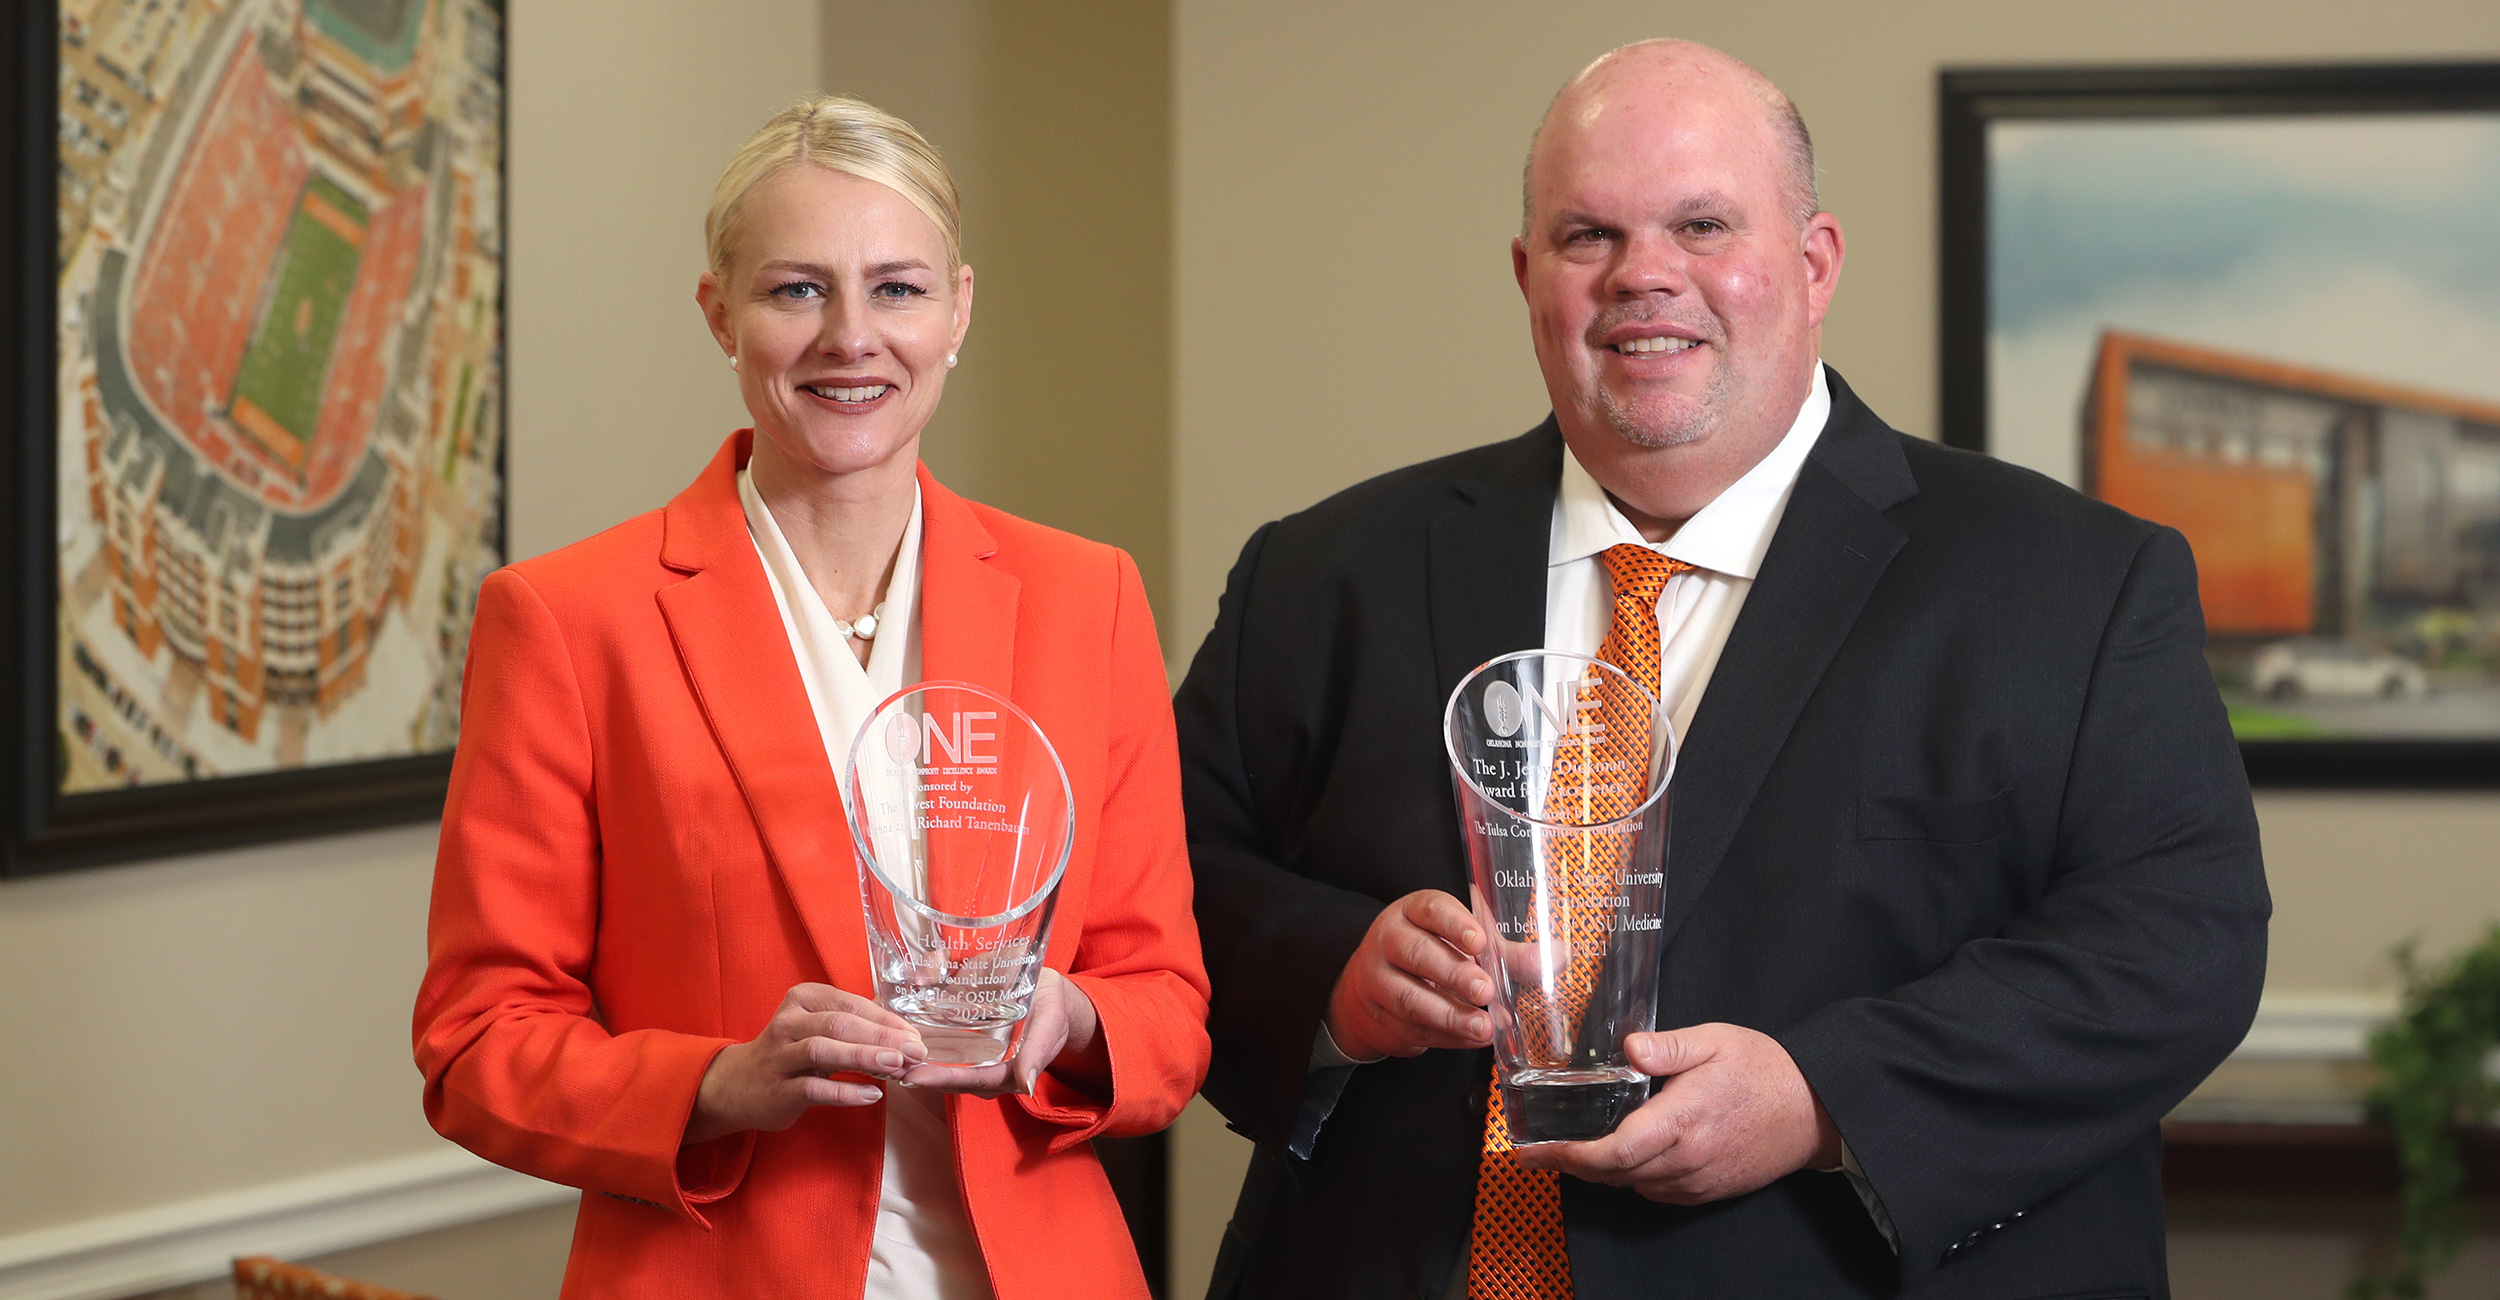 Dr. Kayse Shrum (left) and Dr. Johnny Stephens hold awards given to OSU Center for Health Sciences at the recent ONE Awards.